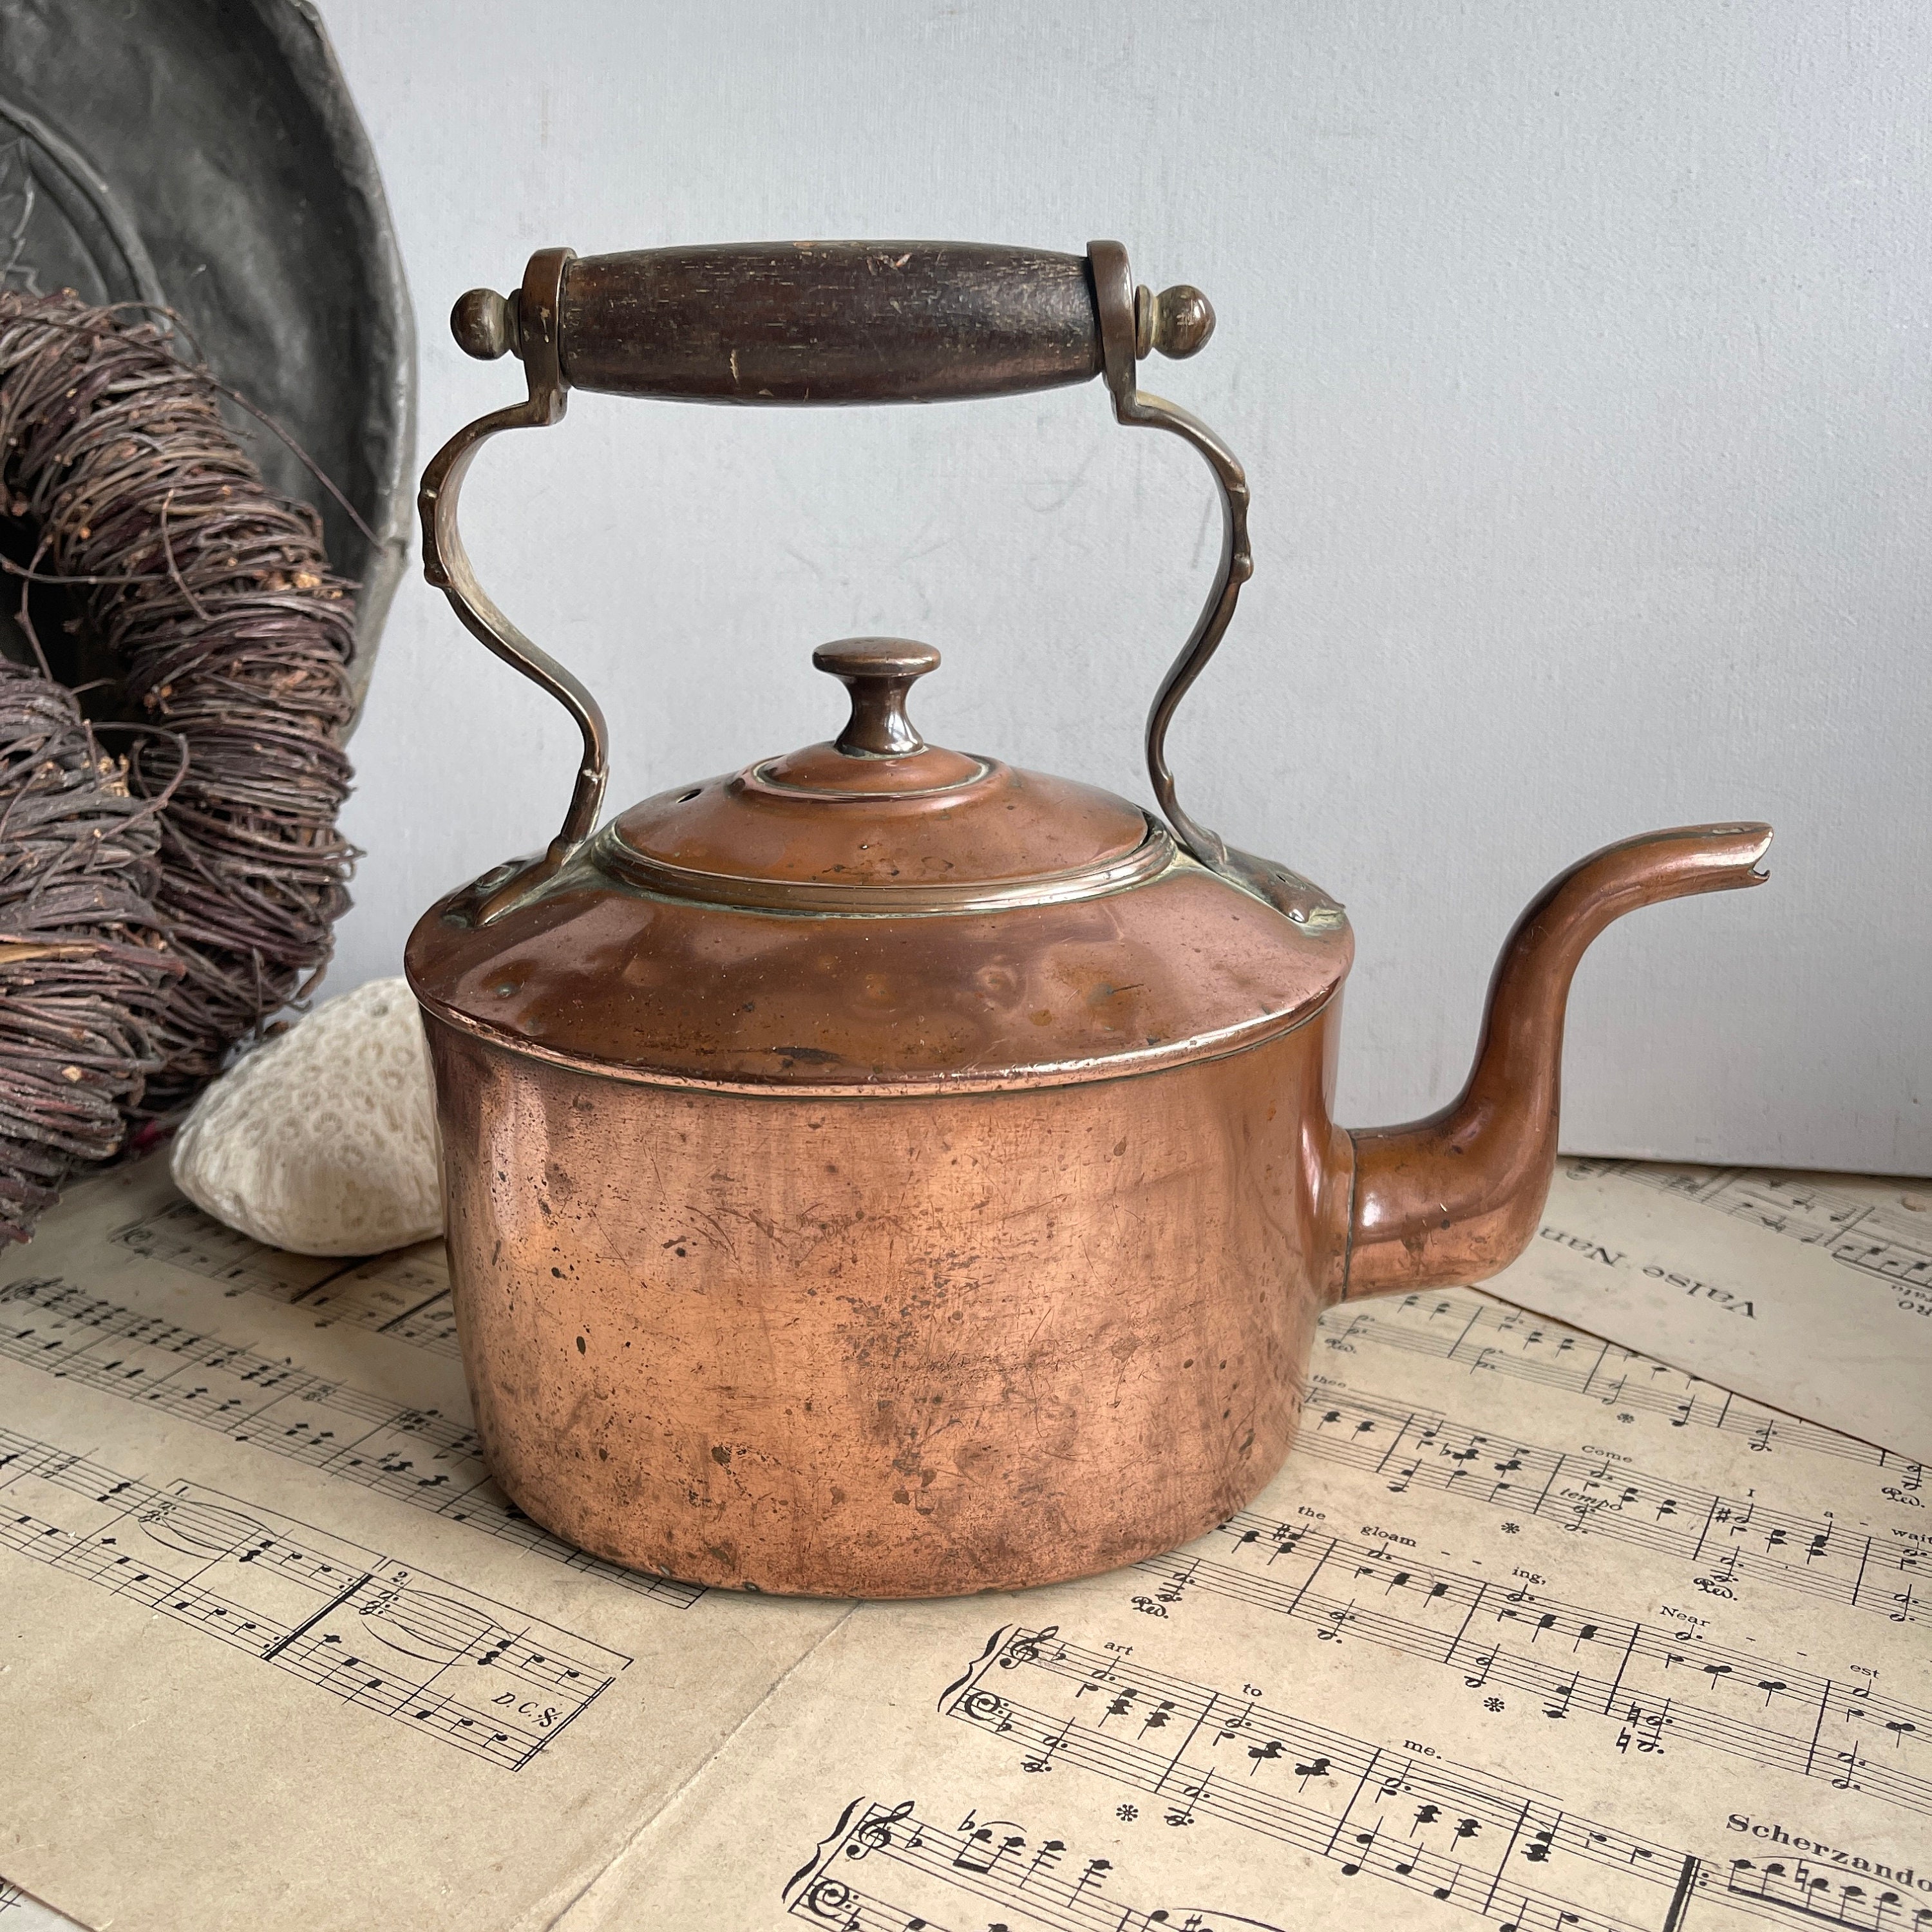 Vintage Copper Tiny Tea Kettle Miniature Teapot Christmas Tree Decoration.  Handmade Ornaments From Pure Copper. Rustic Holiday Décor. 